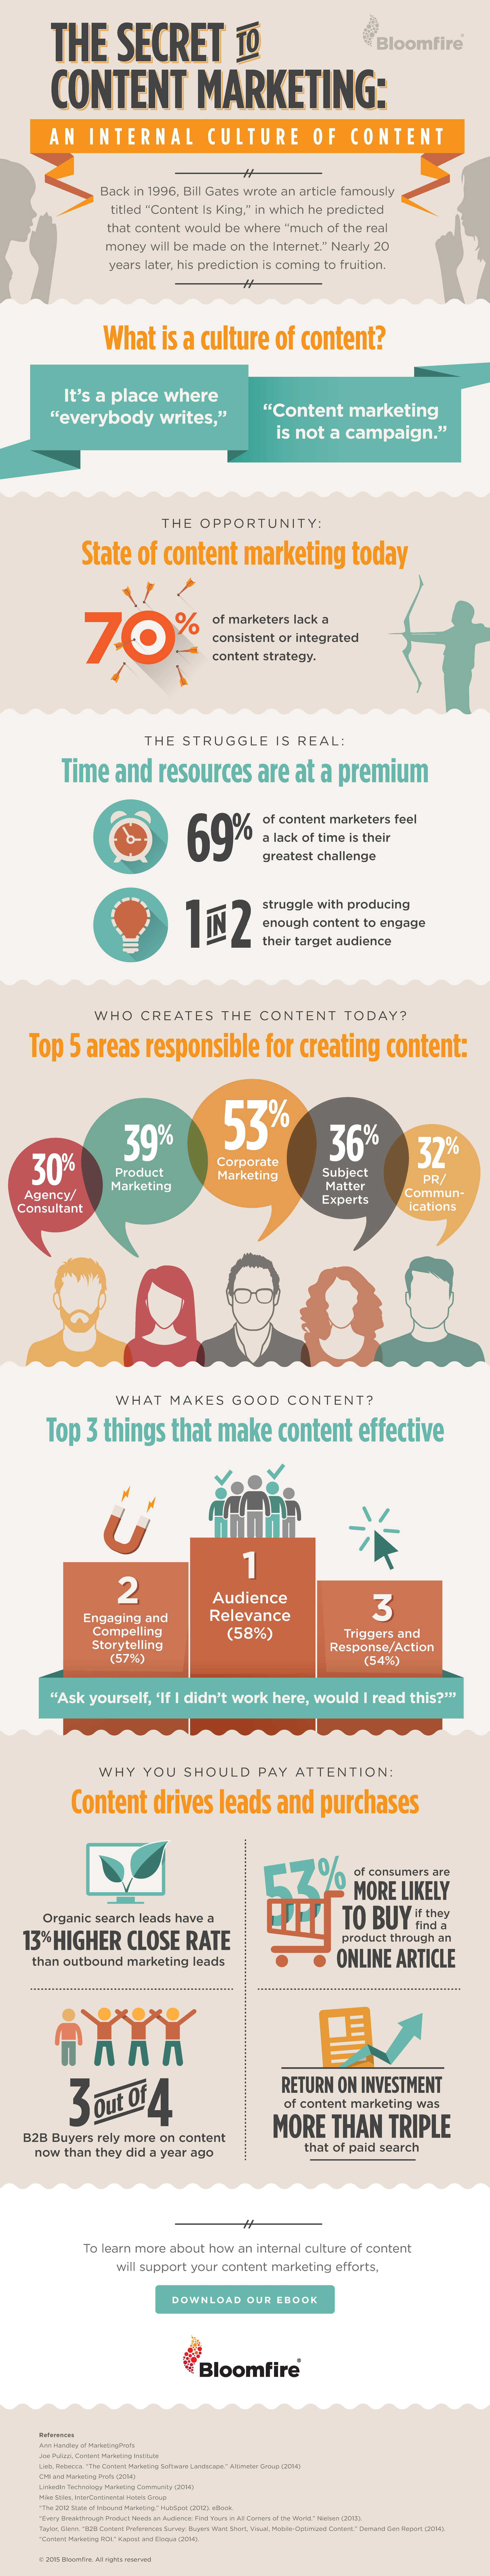 The Importance of Building a Culture of Content at Your Company ...